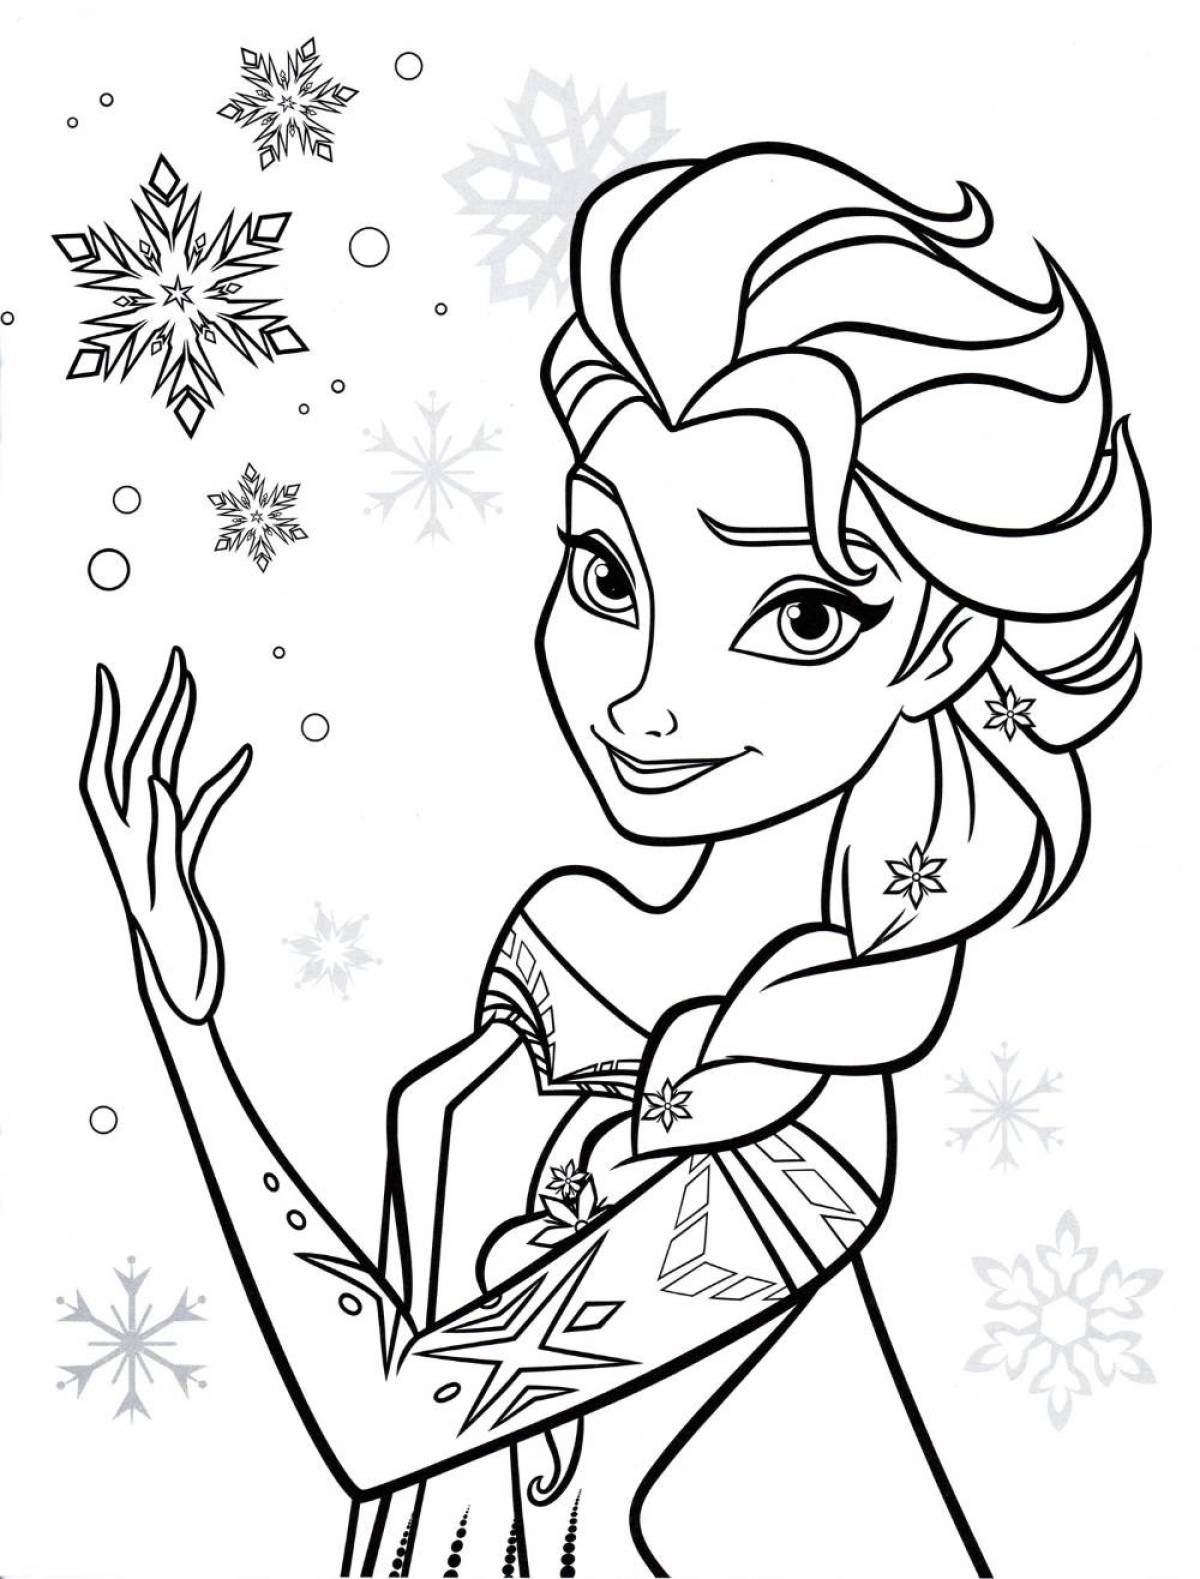 Coloring page wild cold heart for kids